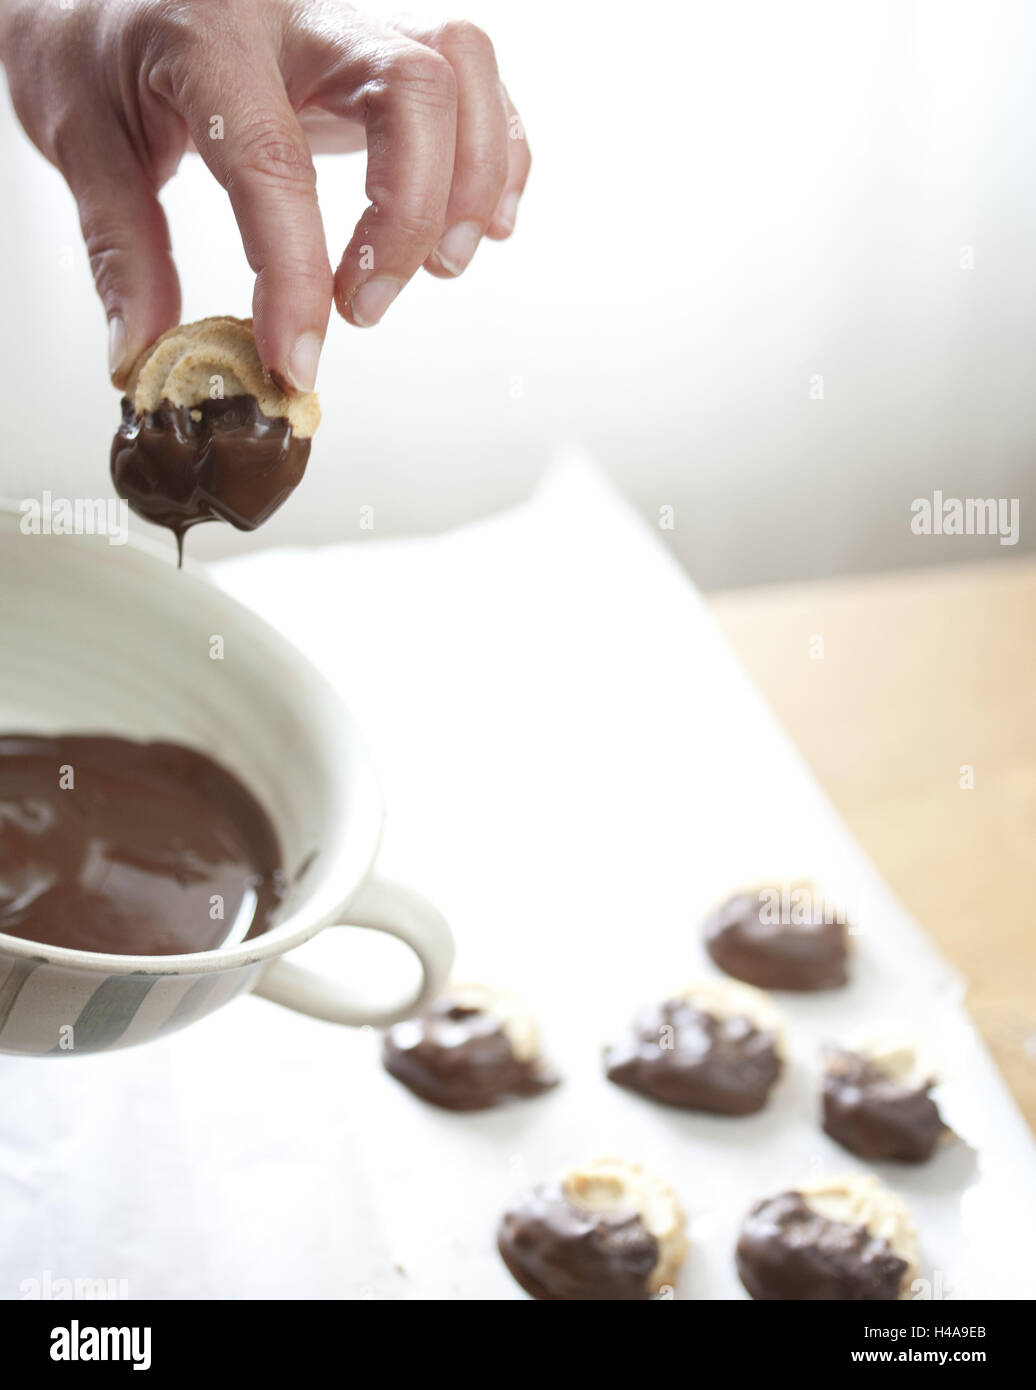 Woman, baking cookies, dipping in chocolate, close-up, Stock Photo